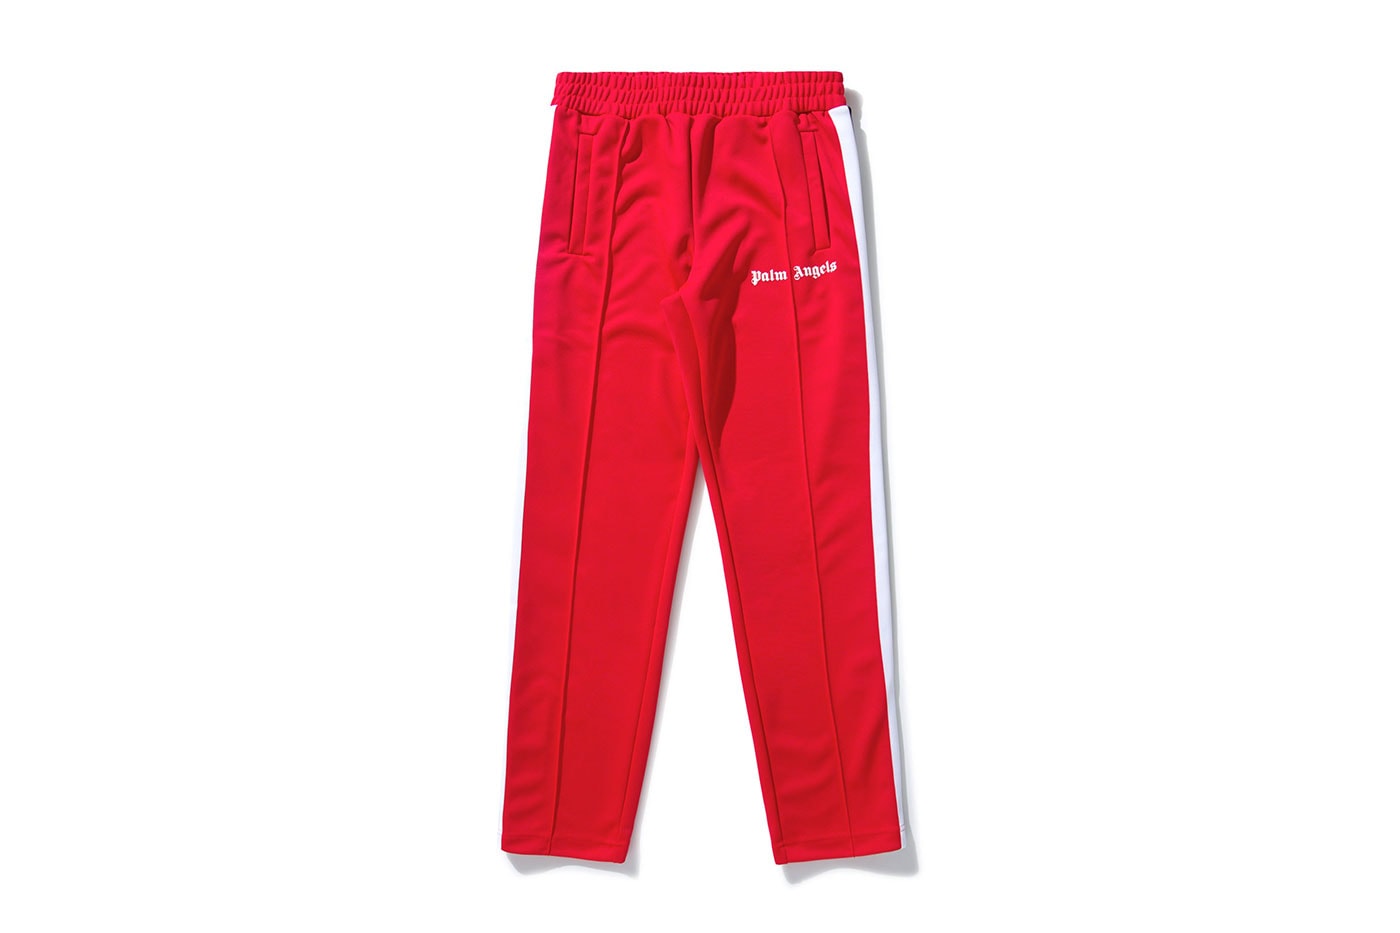 TWO TONE TRACK PANTS in red - Palm Angels® Official